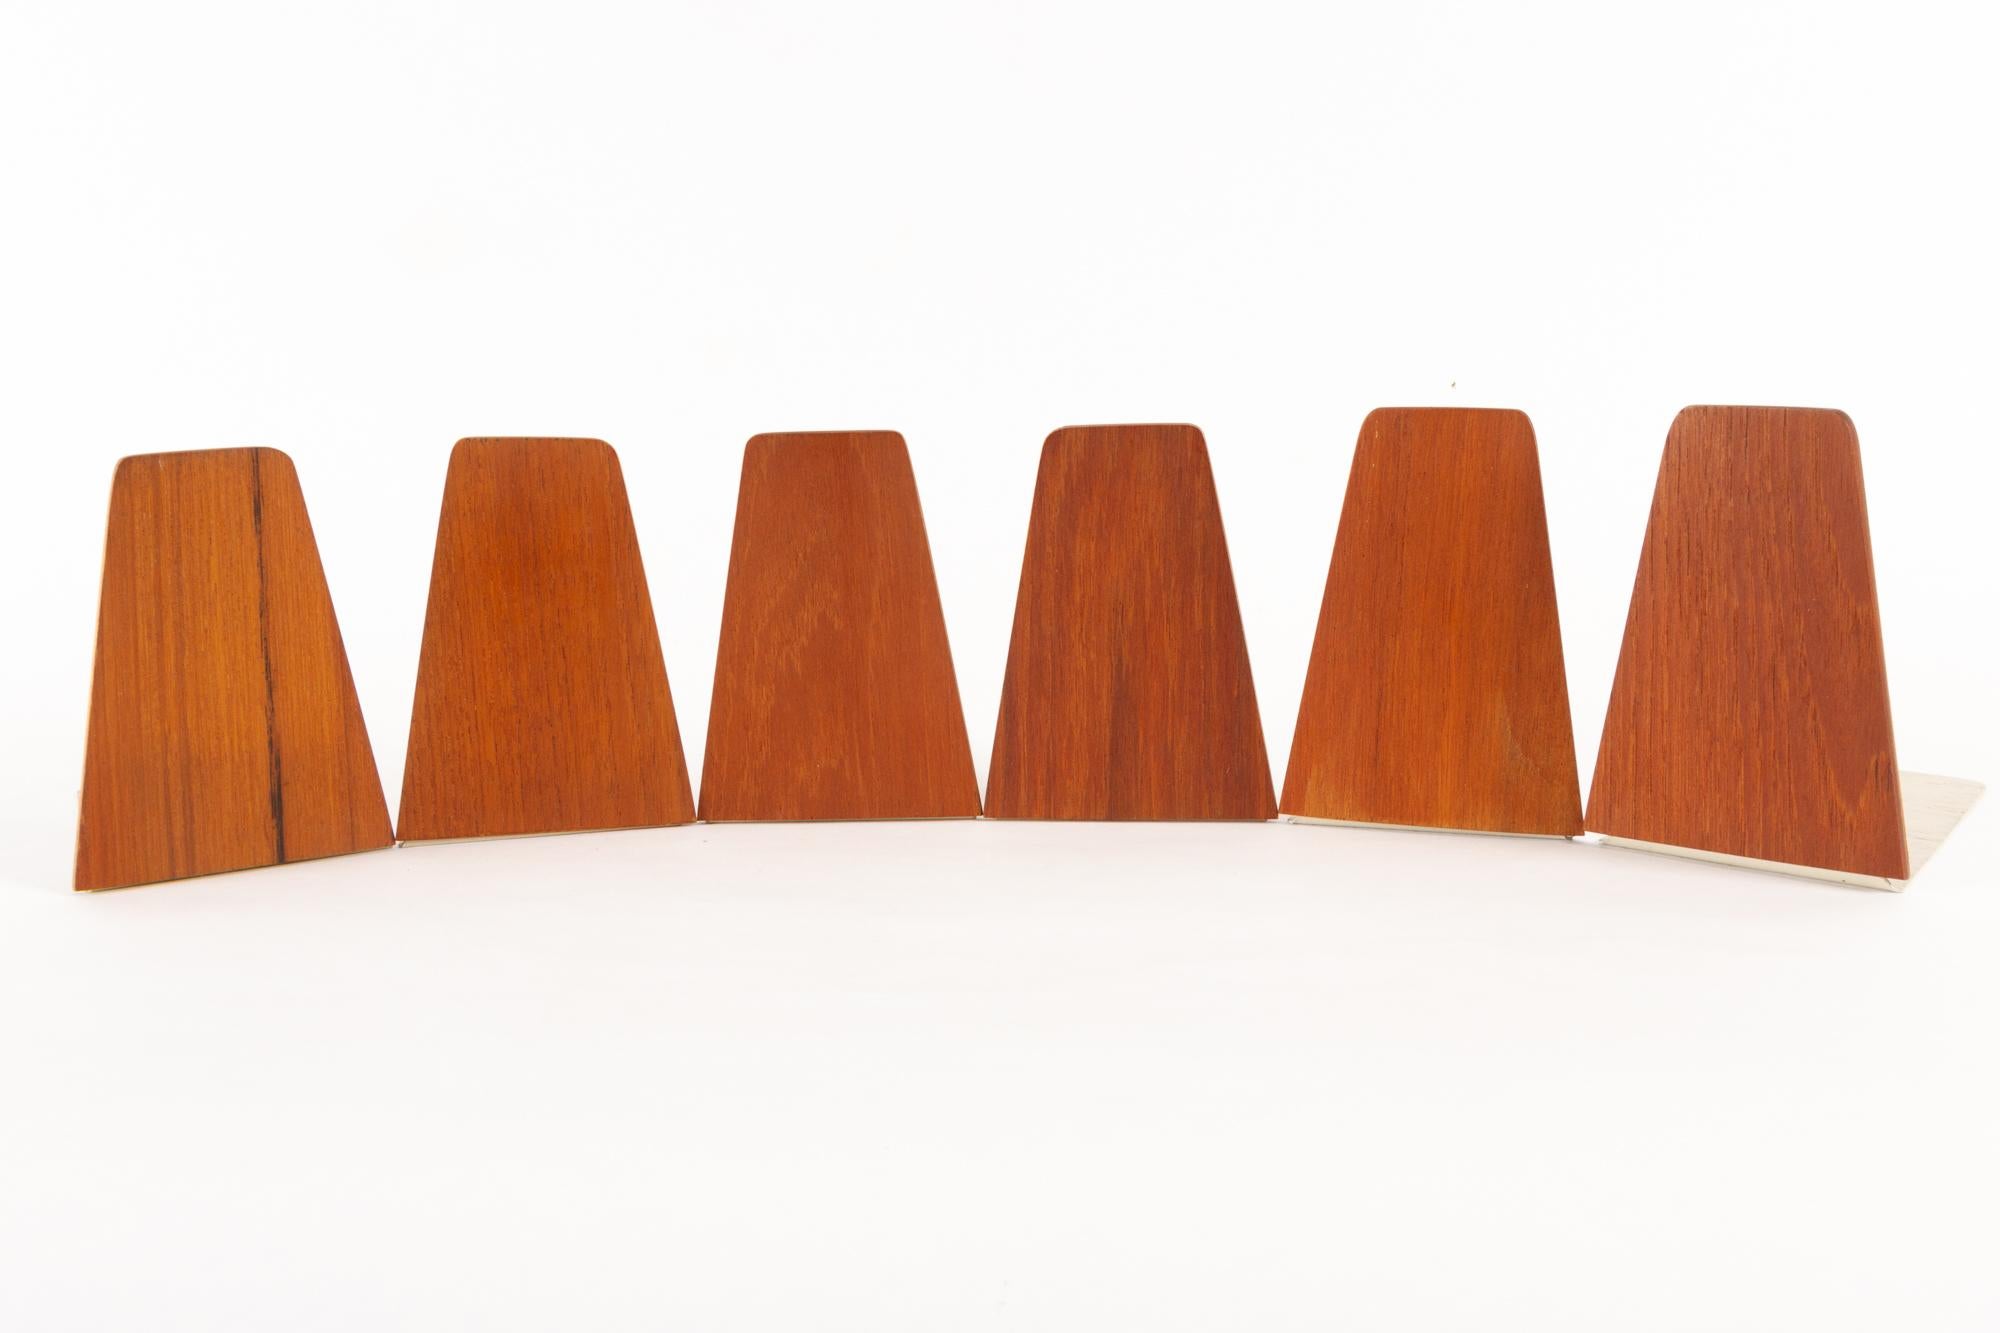 Vintage Danish teak bookends by Kai Kristiansen for FM 1960s set of 6.
These book ends can be used in any bookcase but were originally designed as a part of the FM Reolen wall unit by Danish architect Kai Kristiansen.
Very good original condition.